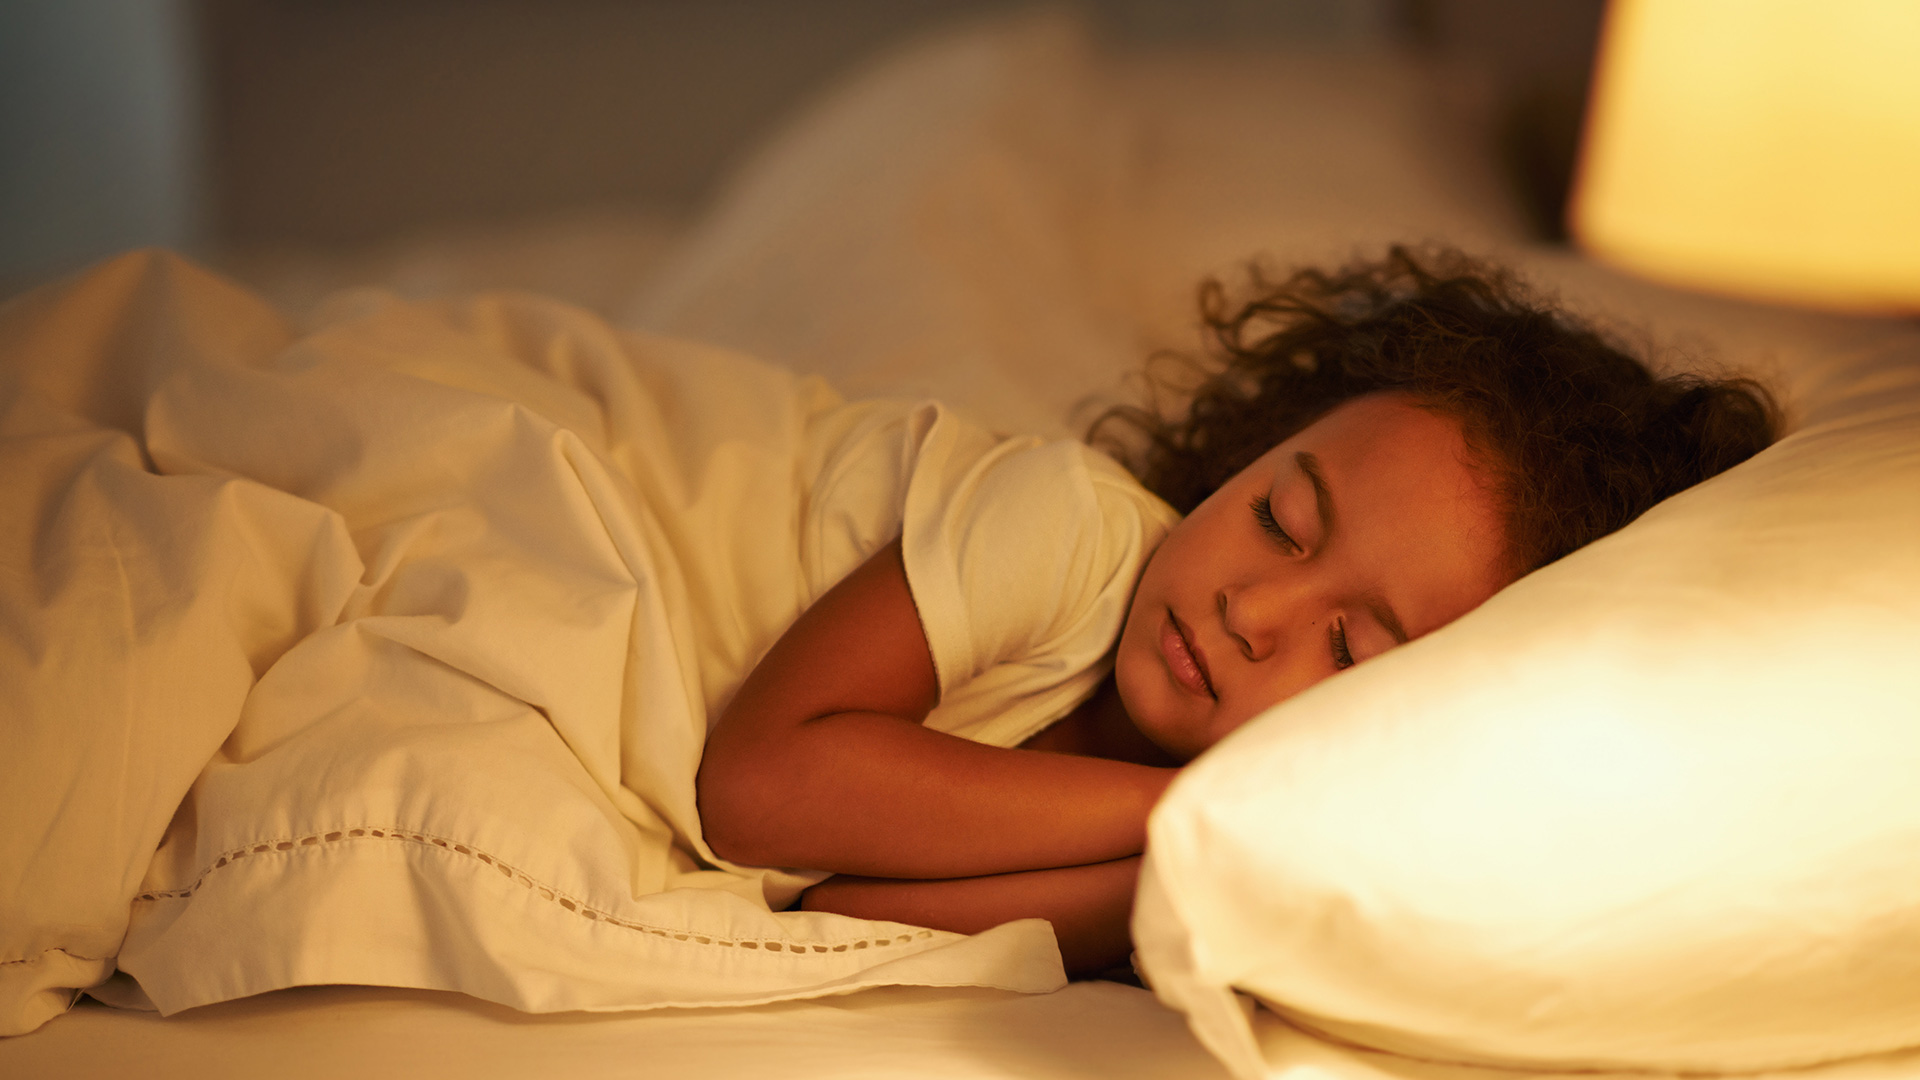 Kids need sleep to learn and grow. To help your child get a good night’s rest, check out these tips from Dr. Suratwala, a specialist at Atrium Health’s Levine Children’s Sleep Medicine. 